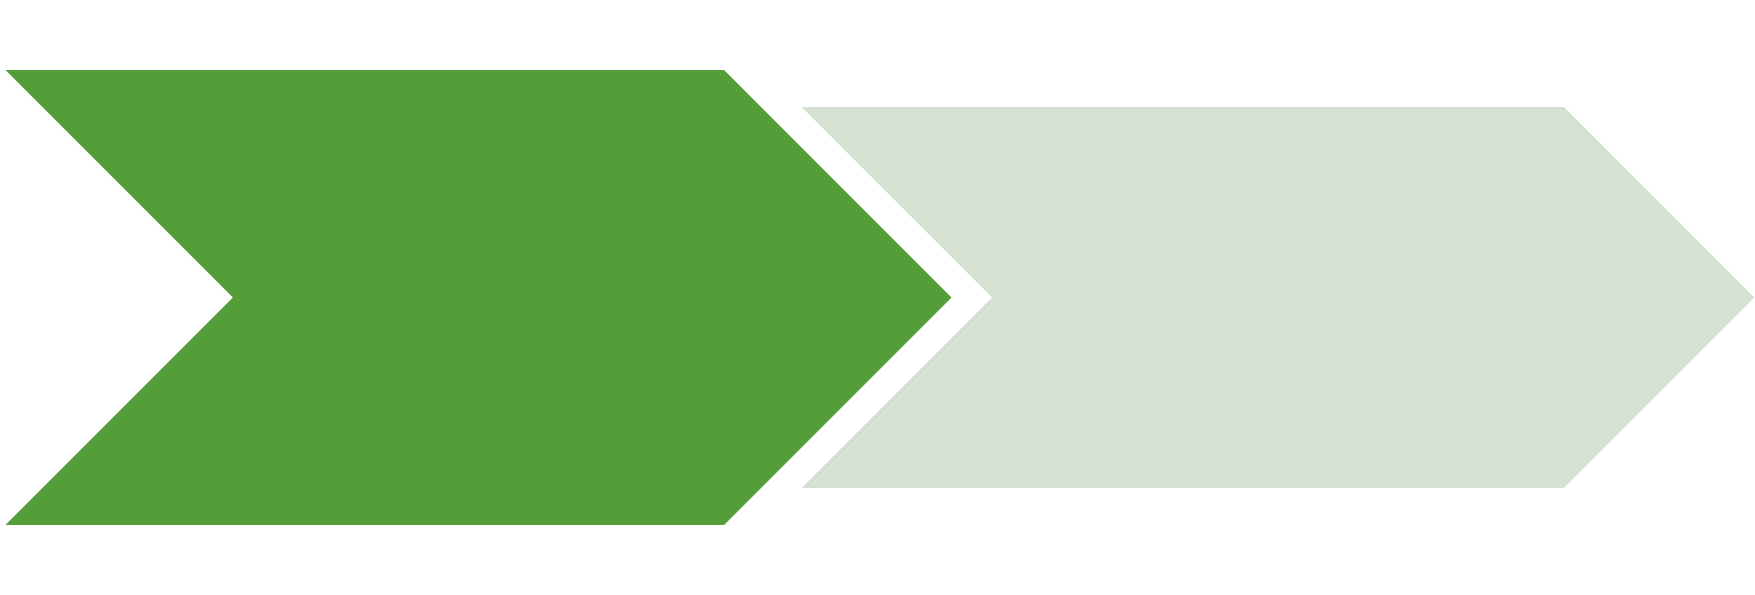 Two arrows pointing to right side